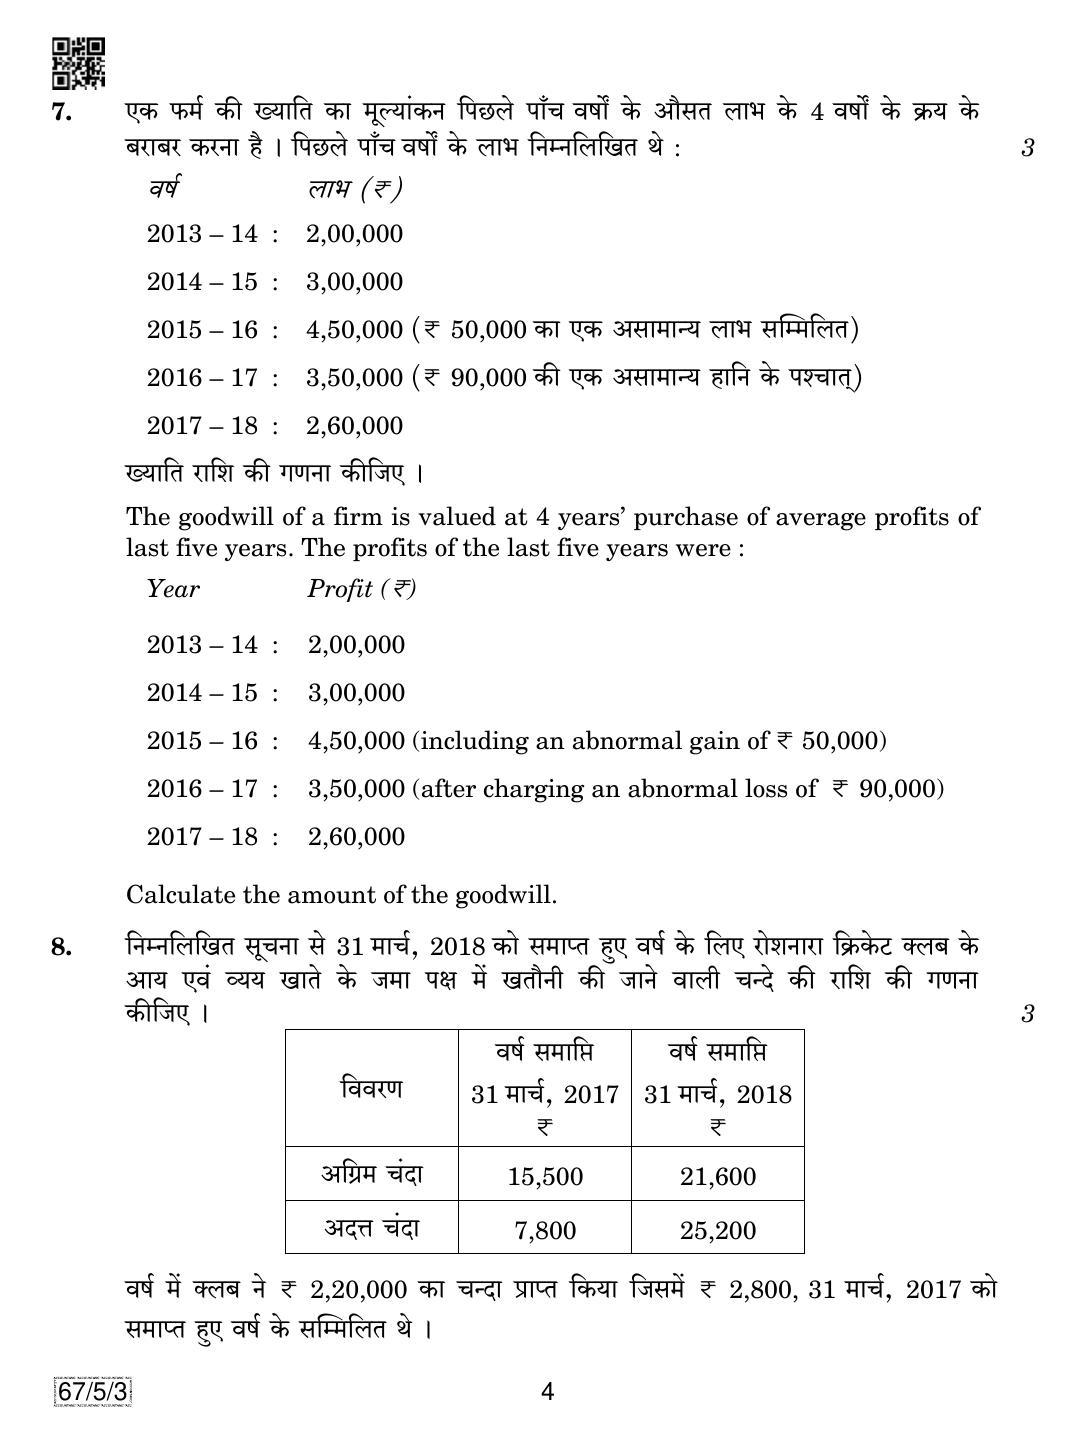 CBSE Class 12 67-5-3 Accountancy 2019 Question Paper - Page 4